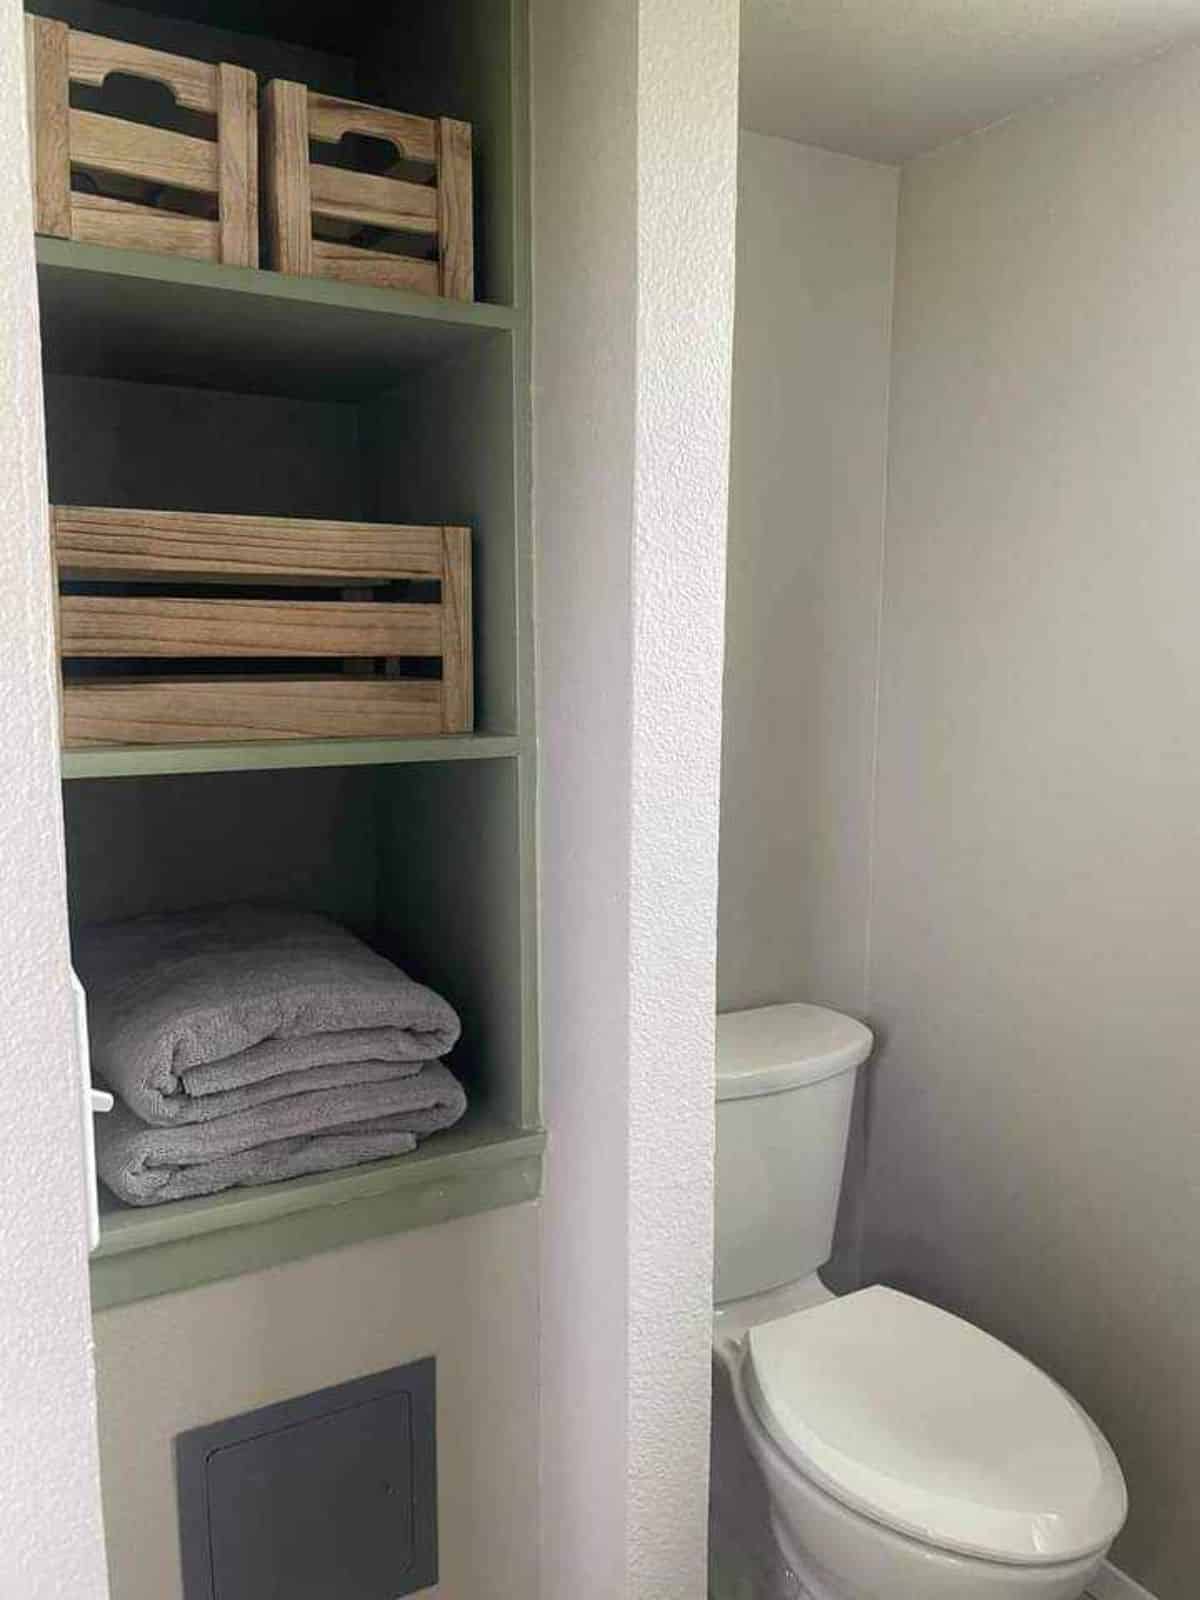 storage space in the bathroom area of 20’ tiny home